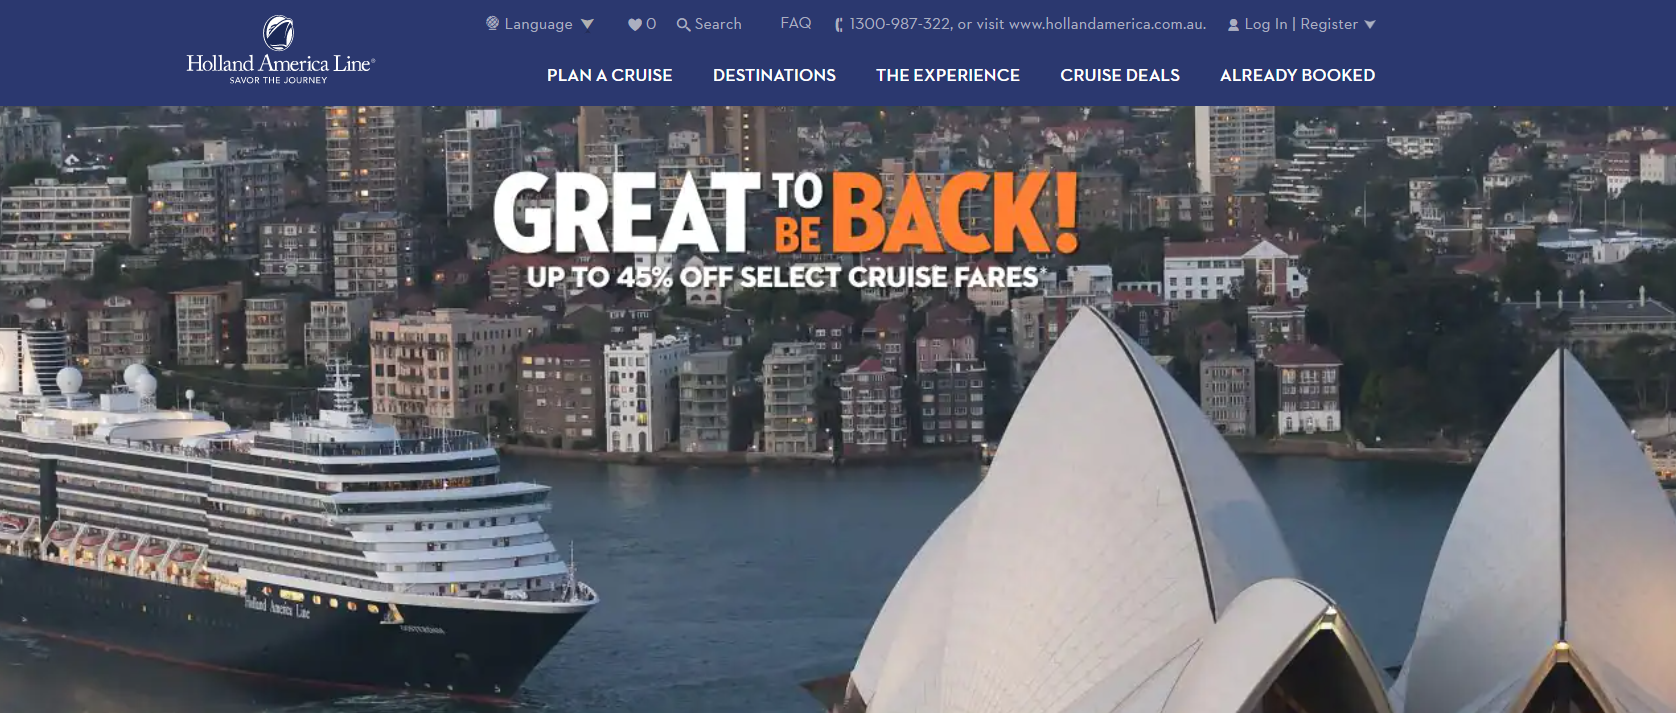 Up to 45% off select cruise fares in Australia & New Zealand.